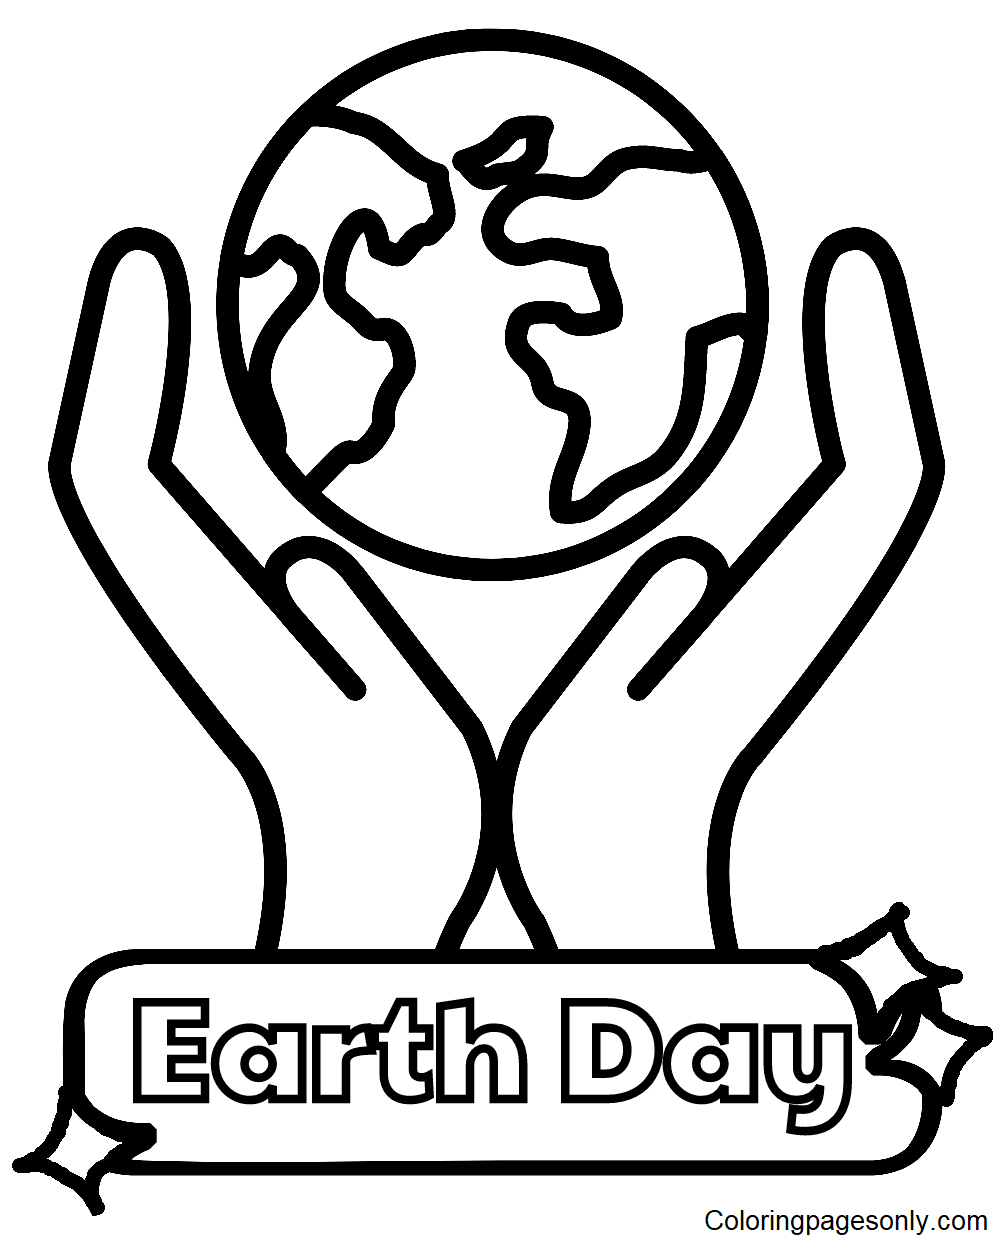 Free Earth Day Coloring Pages